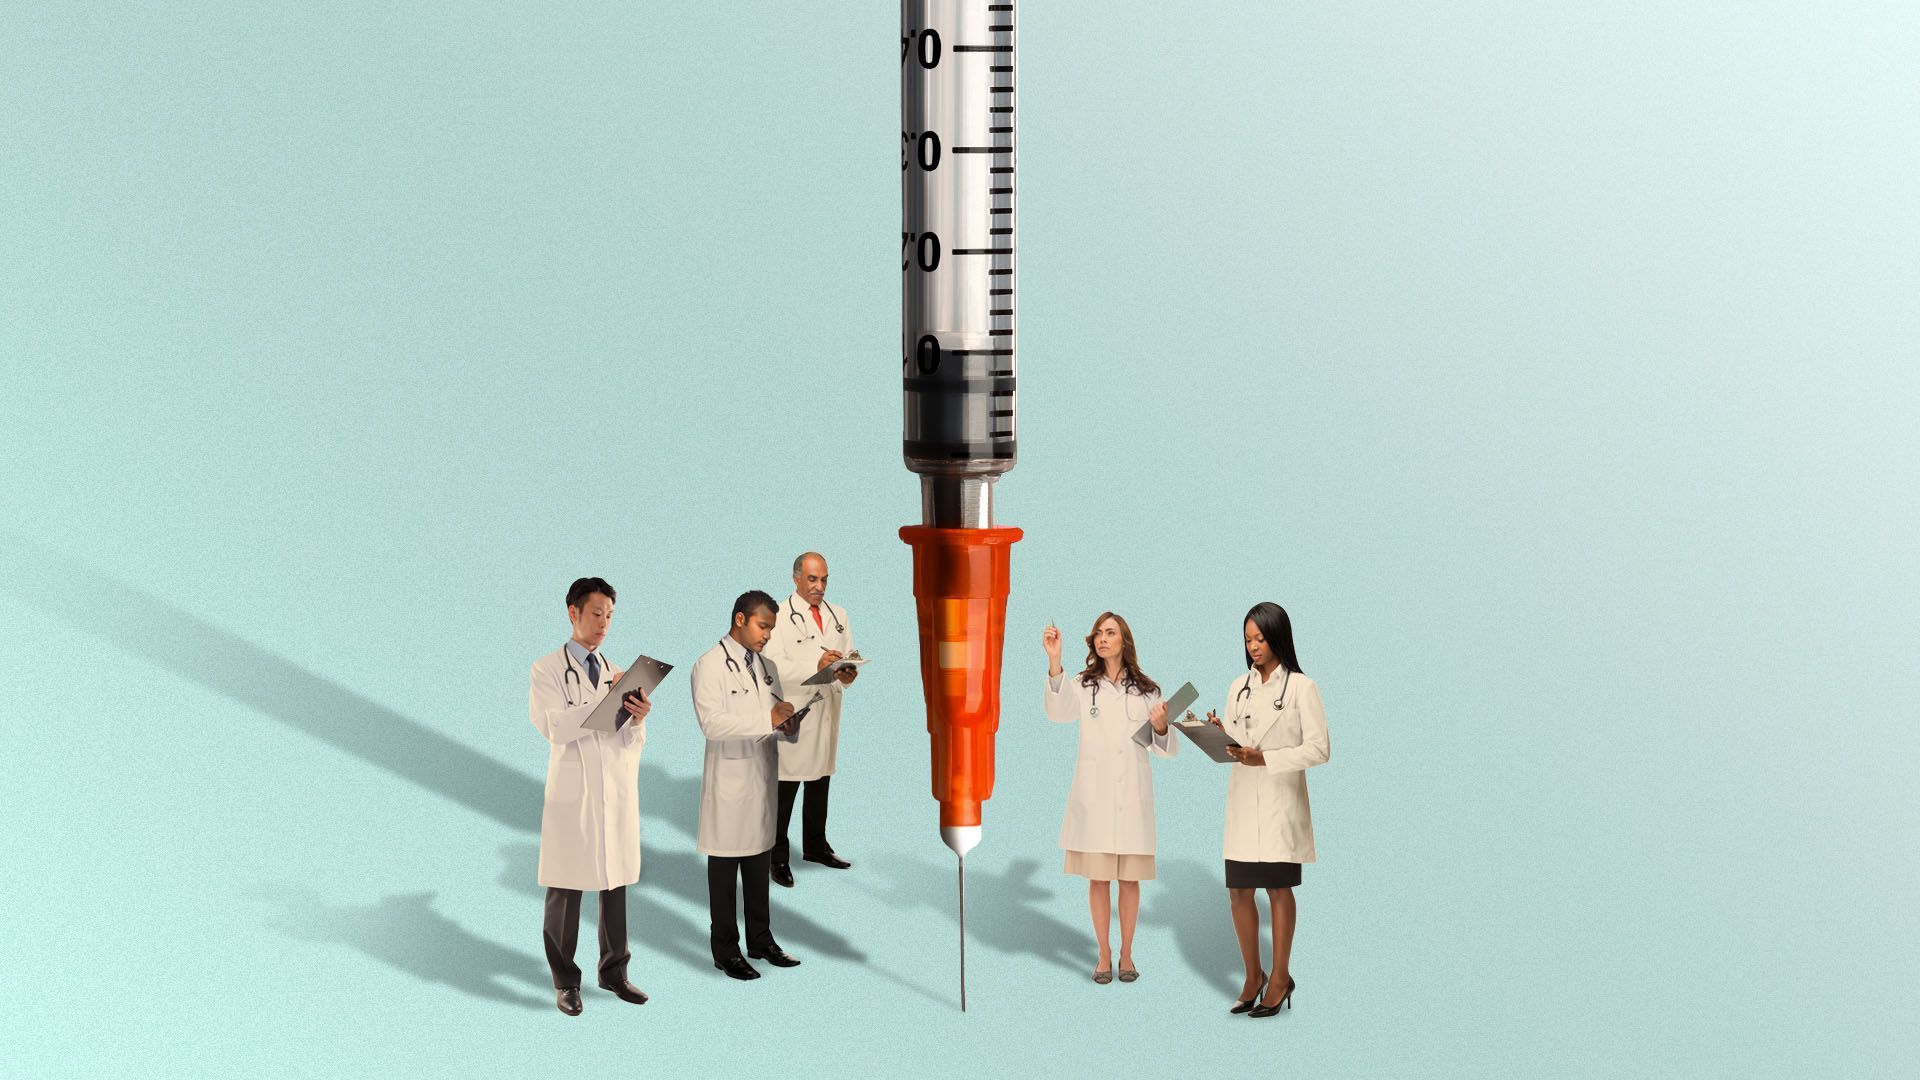 Illustration of a group of doctors examining a giant syringe 